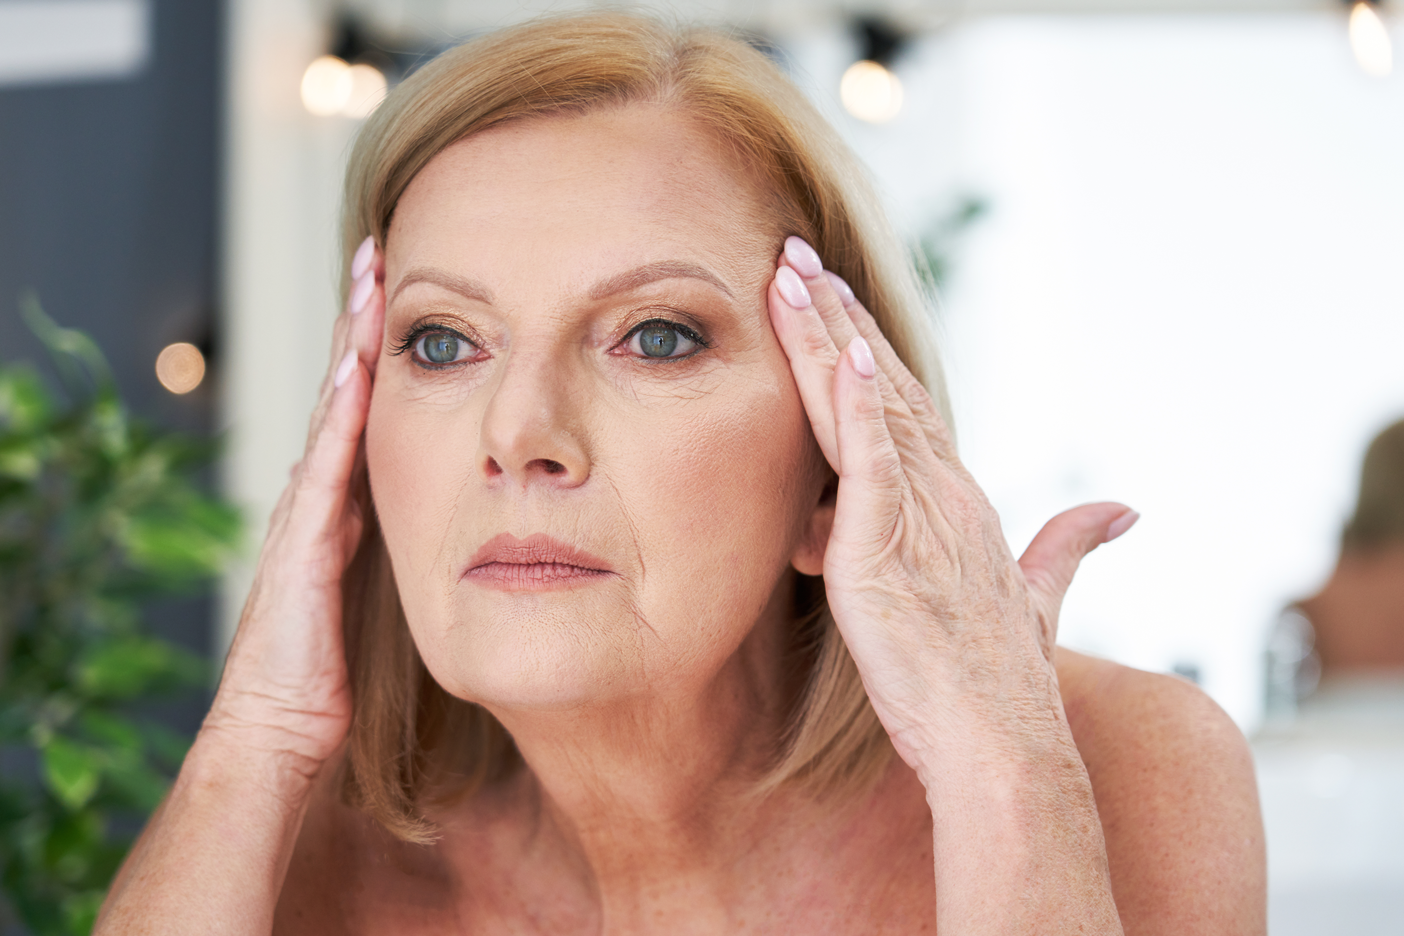 Woman looking at wrinkles in the mirror and thinking about botox